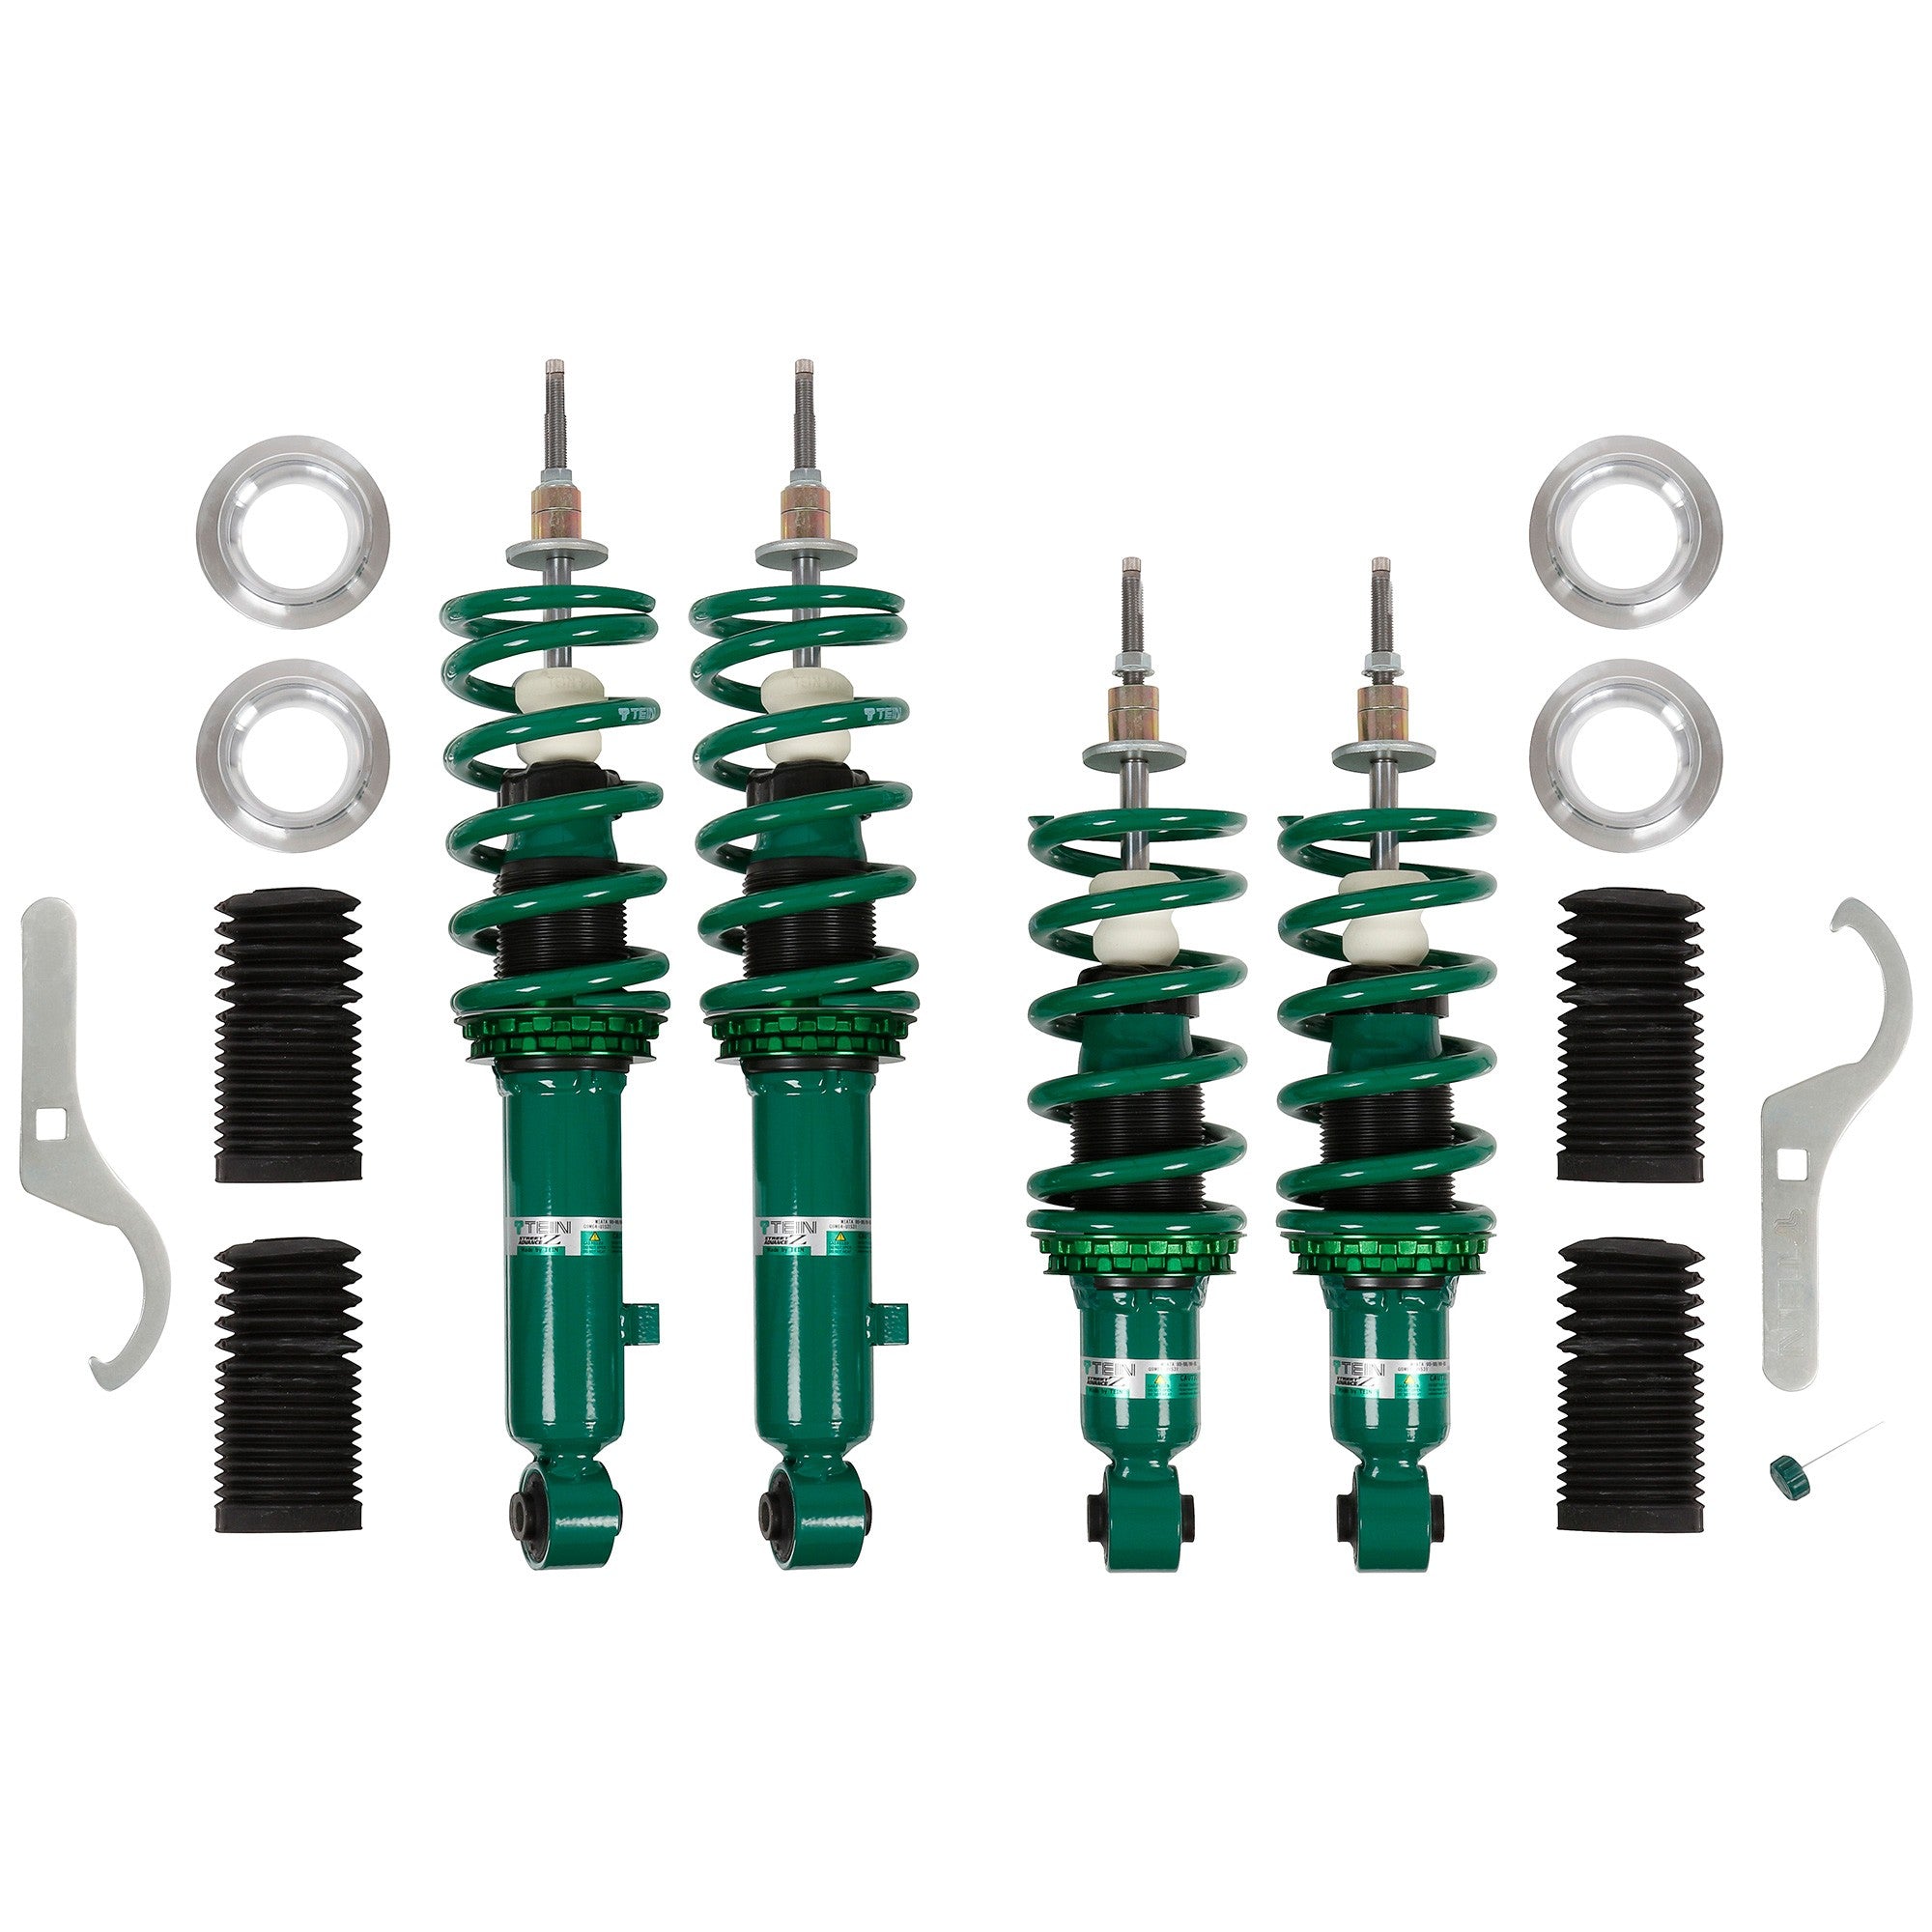 TEIN GSP20-9USS2 COILOVER KIT STREET ADVANCE Z NISSAN MAXIMA A33 2000-2003 Photo-1 